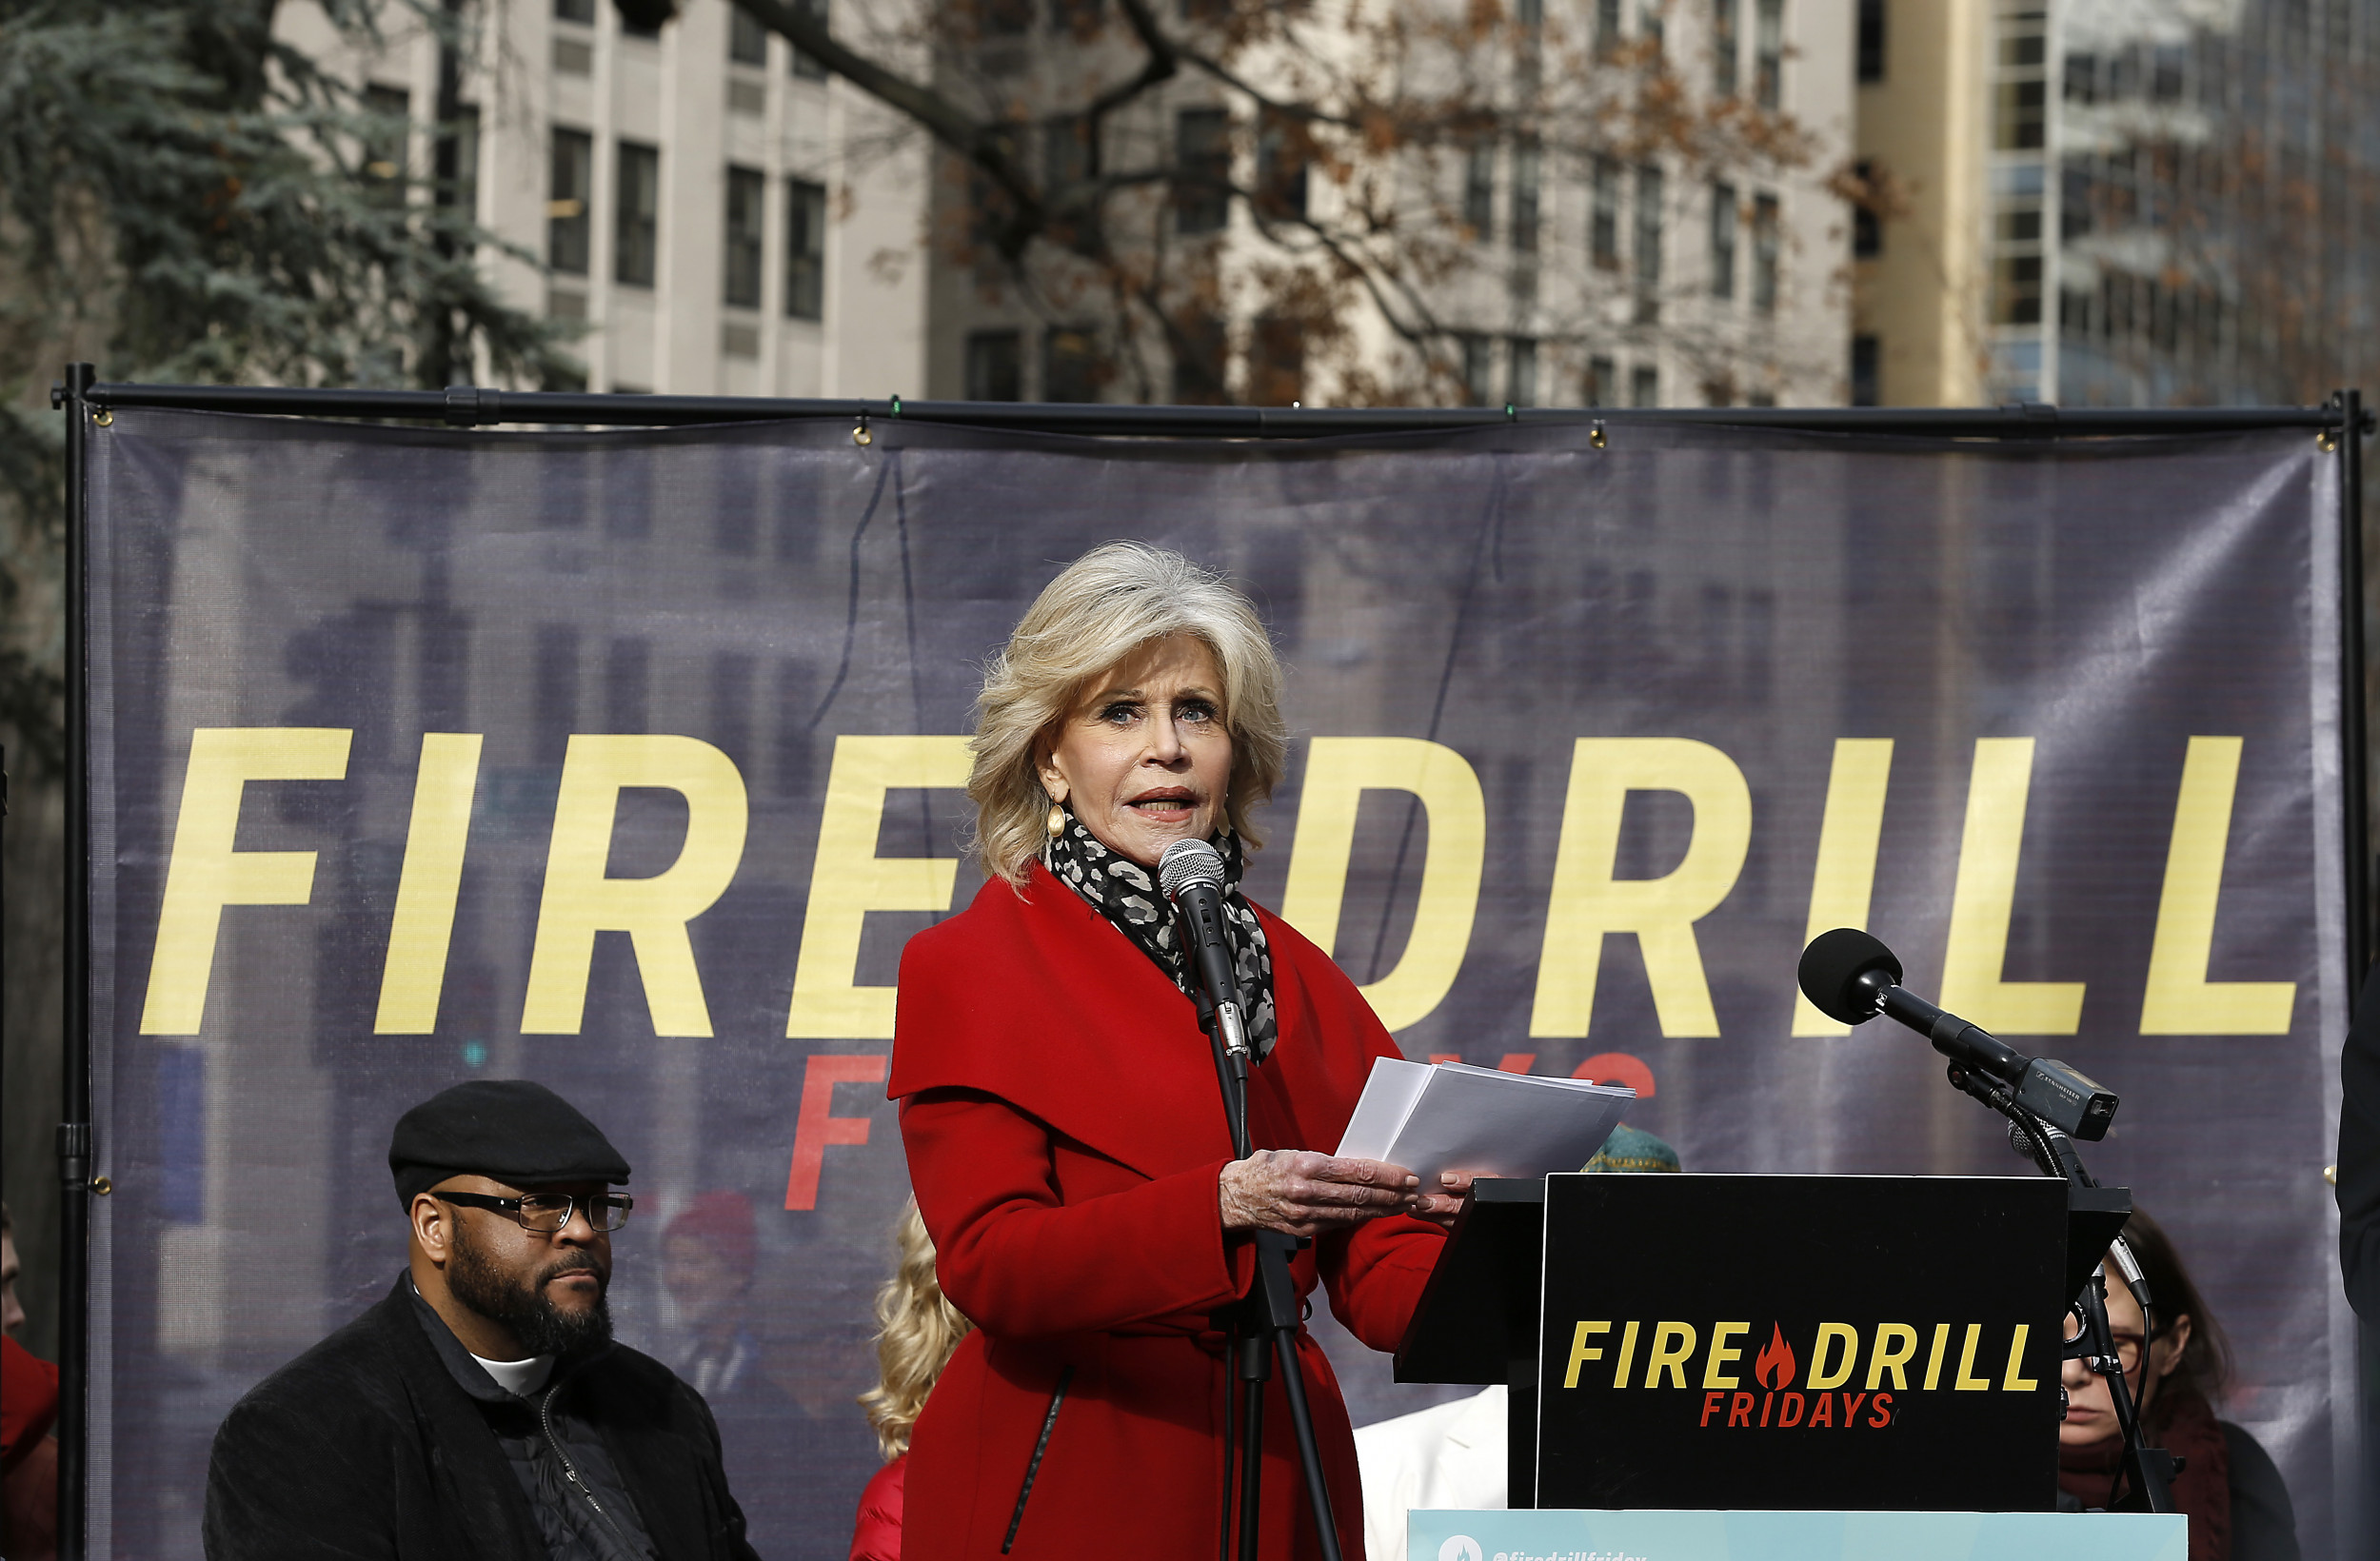 Fonda Brings Her Change Protest 'Fire Drill Fridays' That Red Coat) to Los Angeles